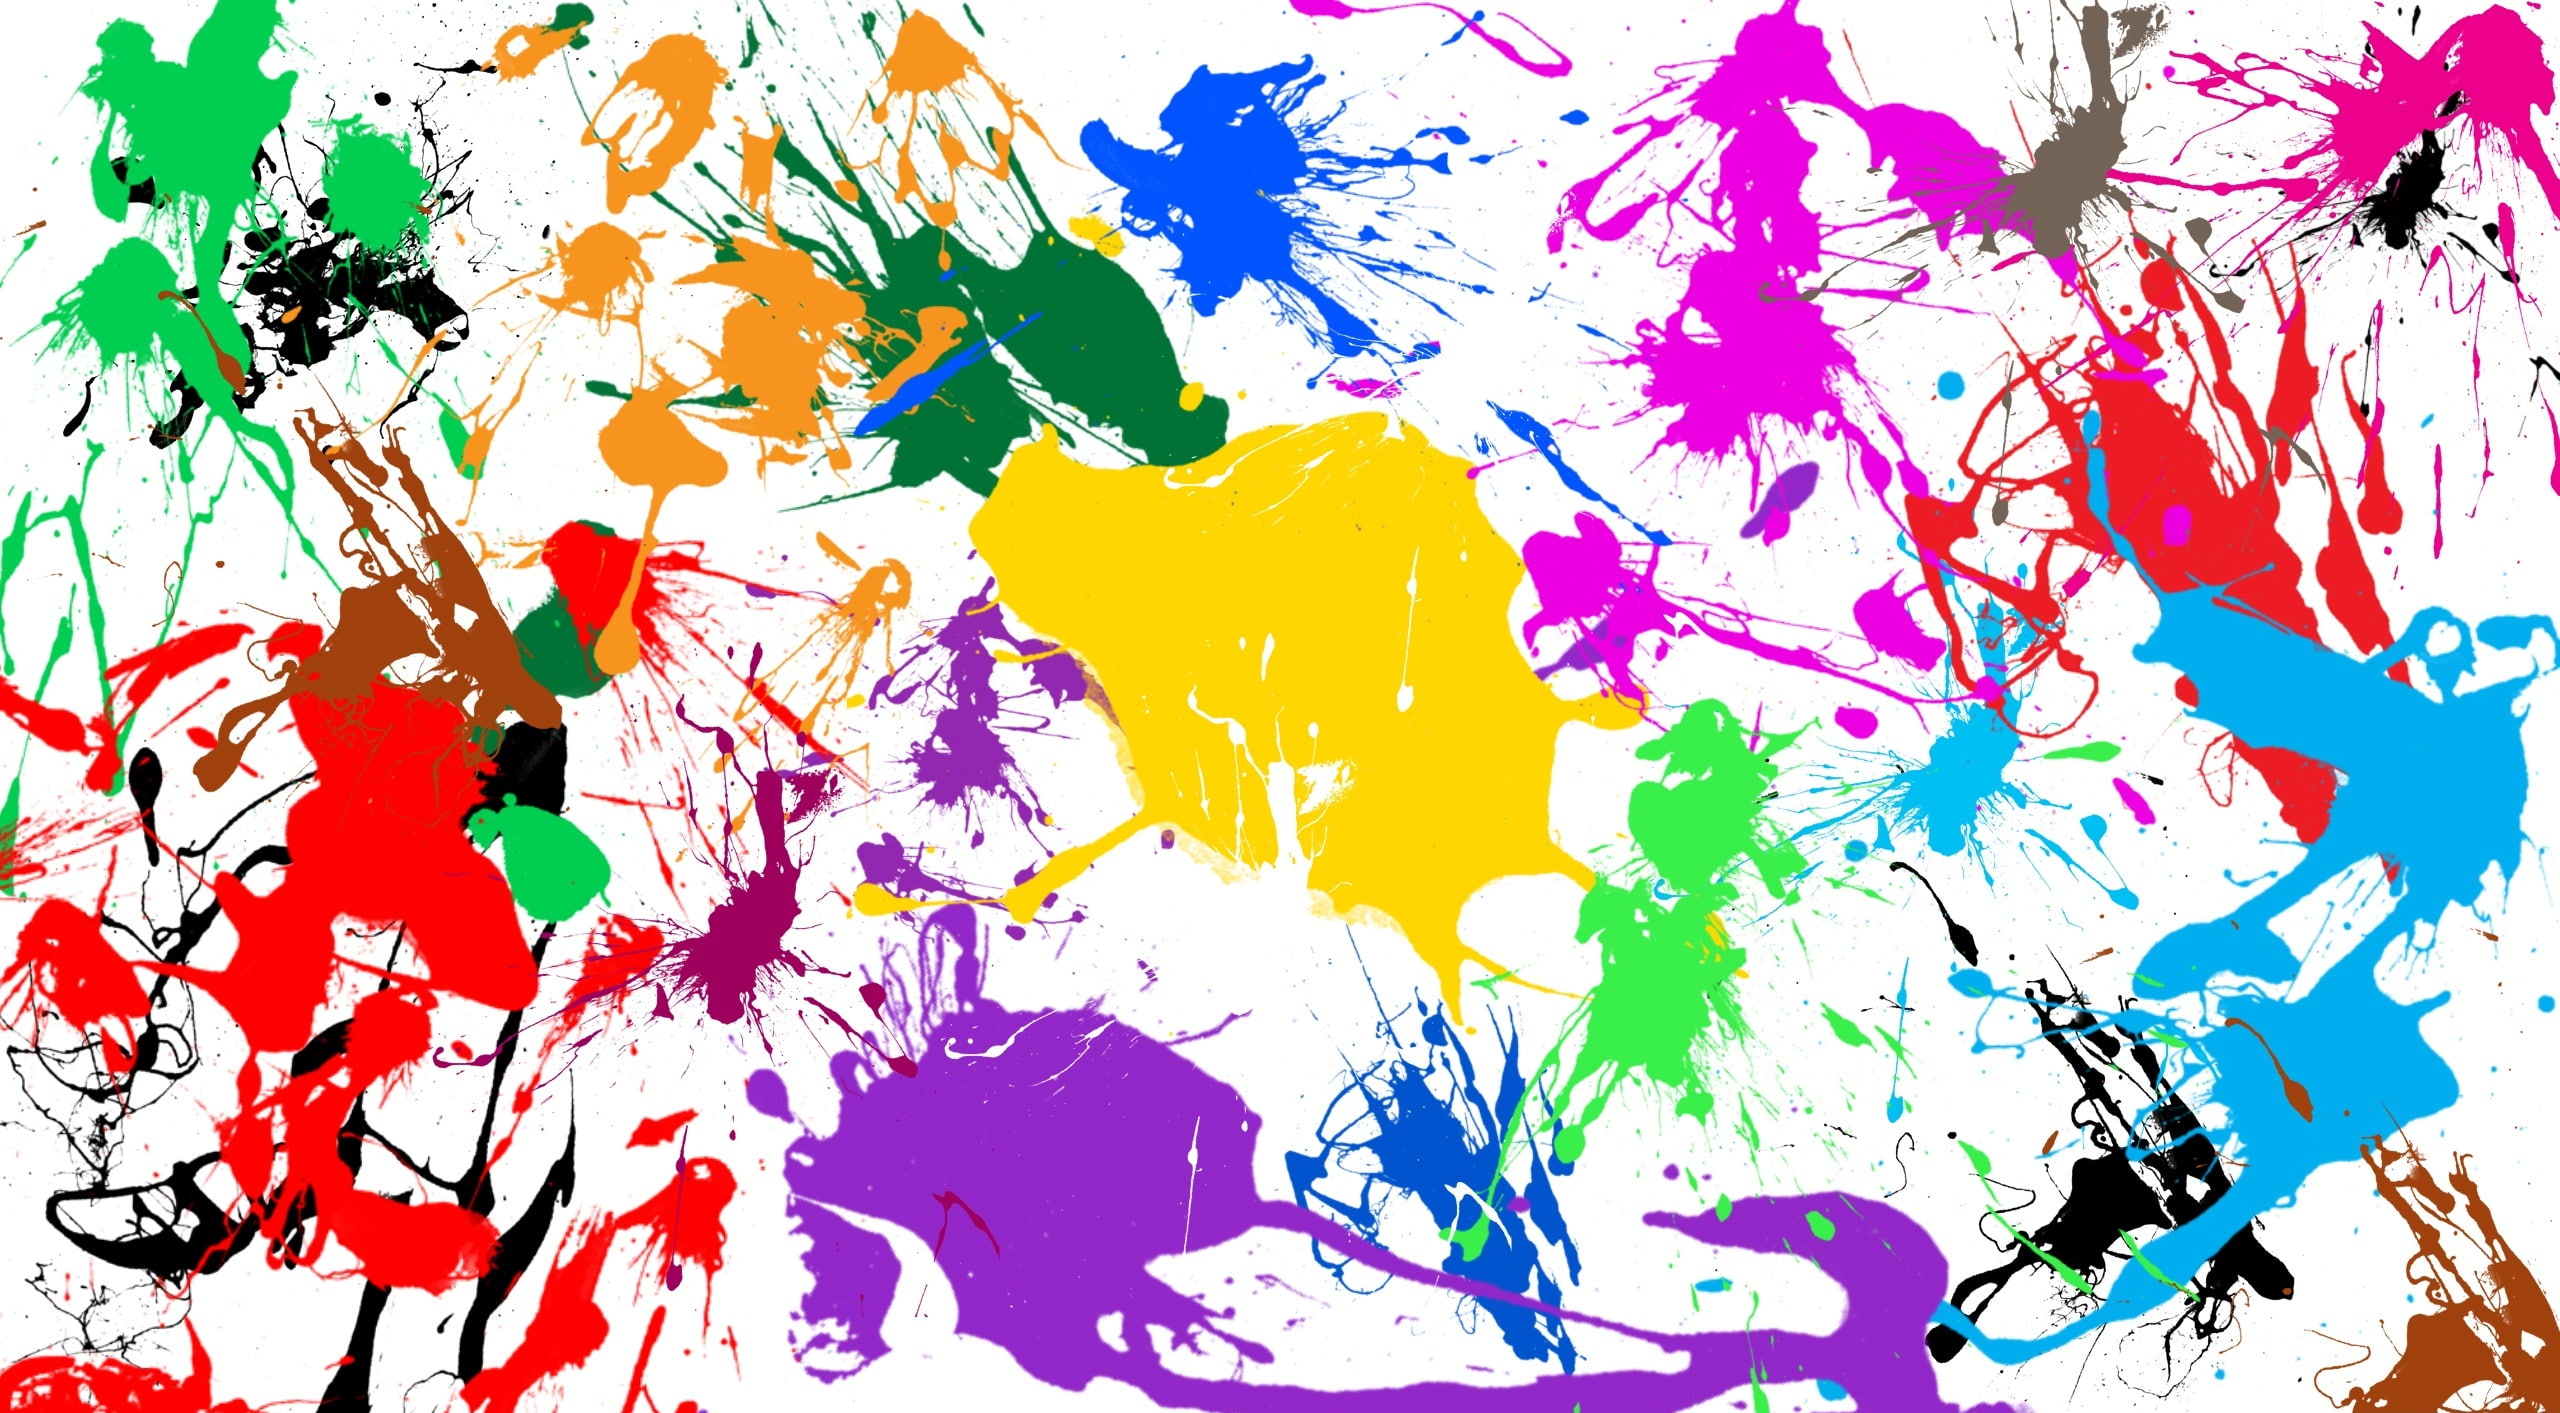 Paint Splatter HD Wallpaper, red, blue, and yellow abstract painting